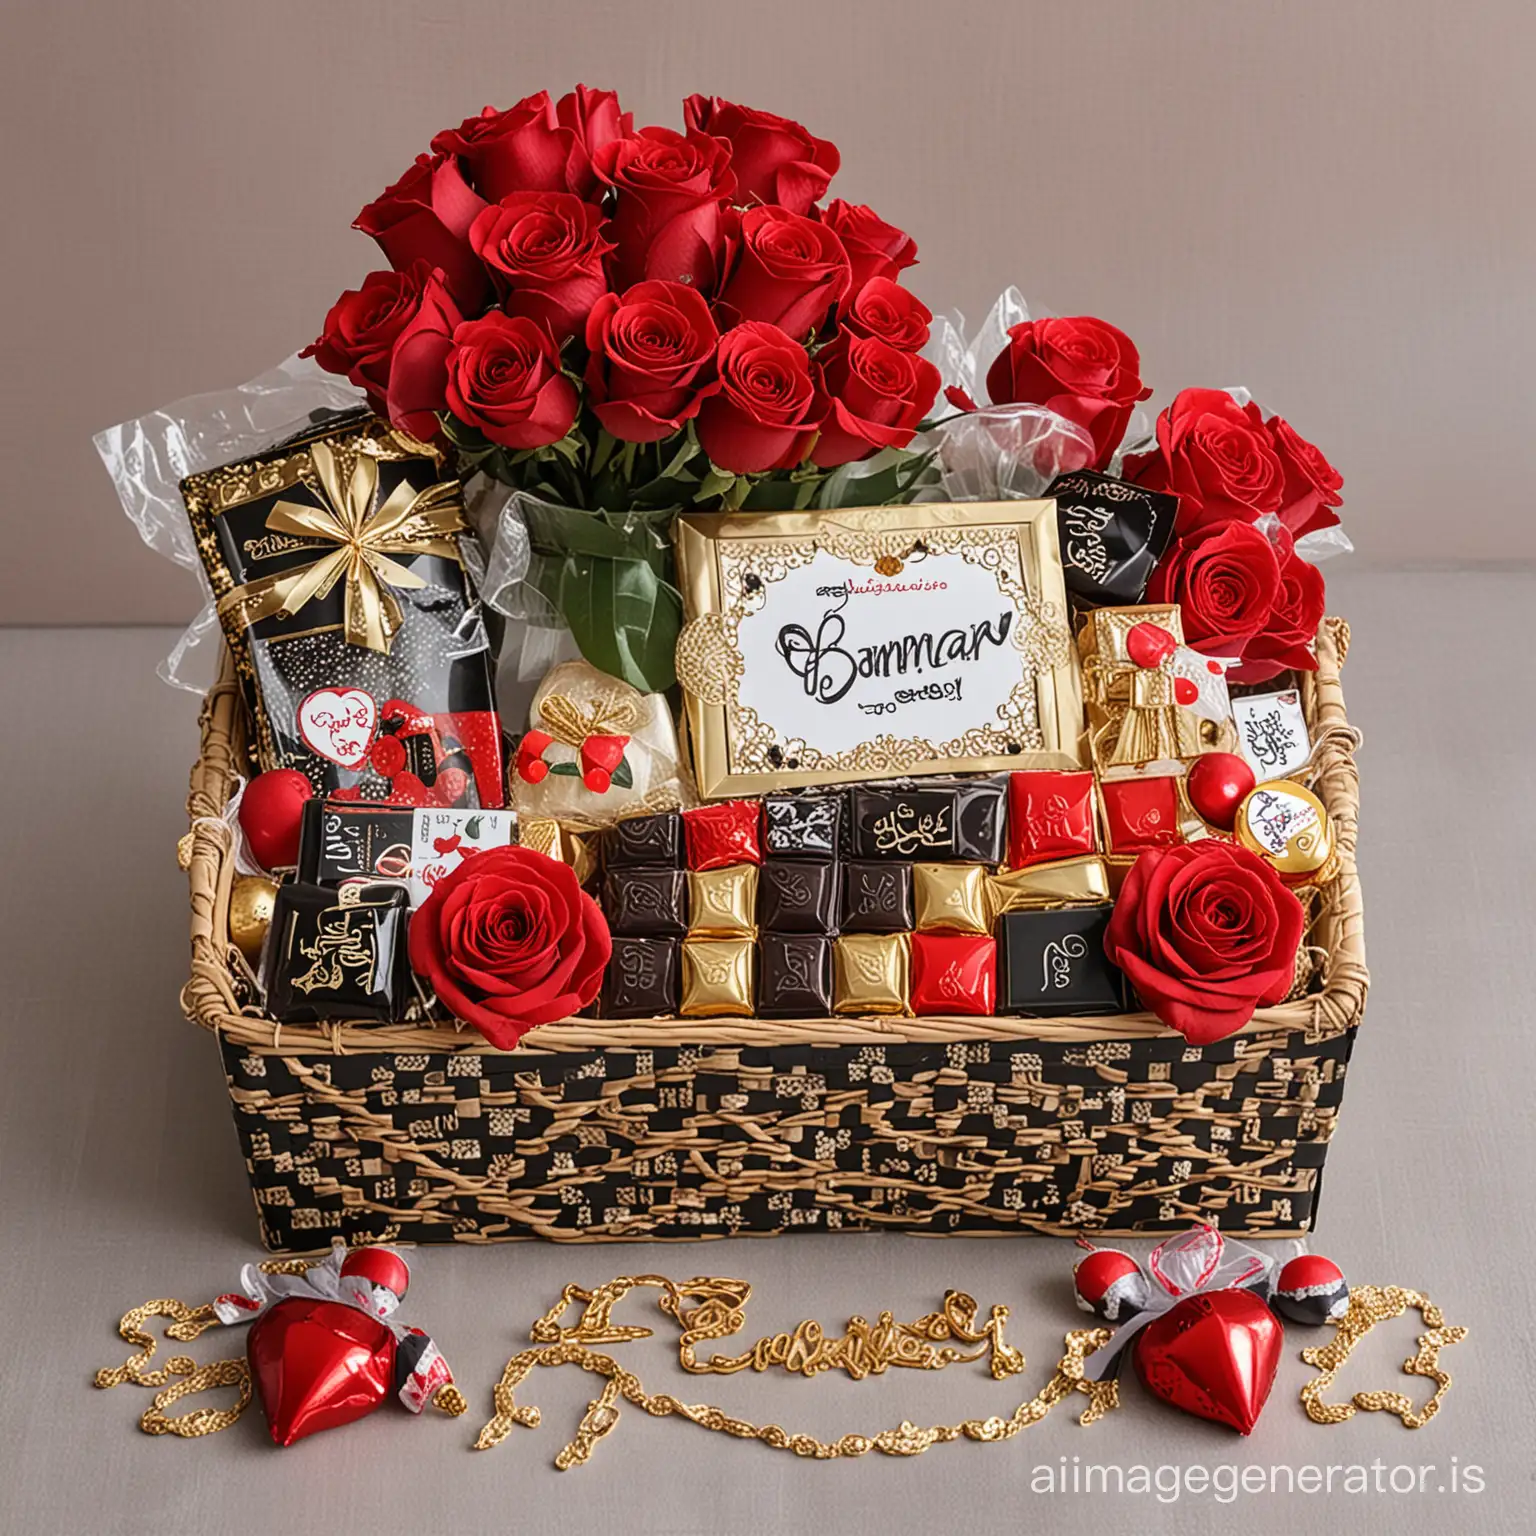 Eid-Gift-Basket-Red-and-Black-Roses-Chocolates-and-Bangles-with-Personalized-Name-Eman